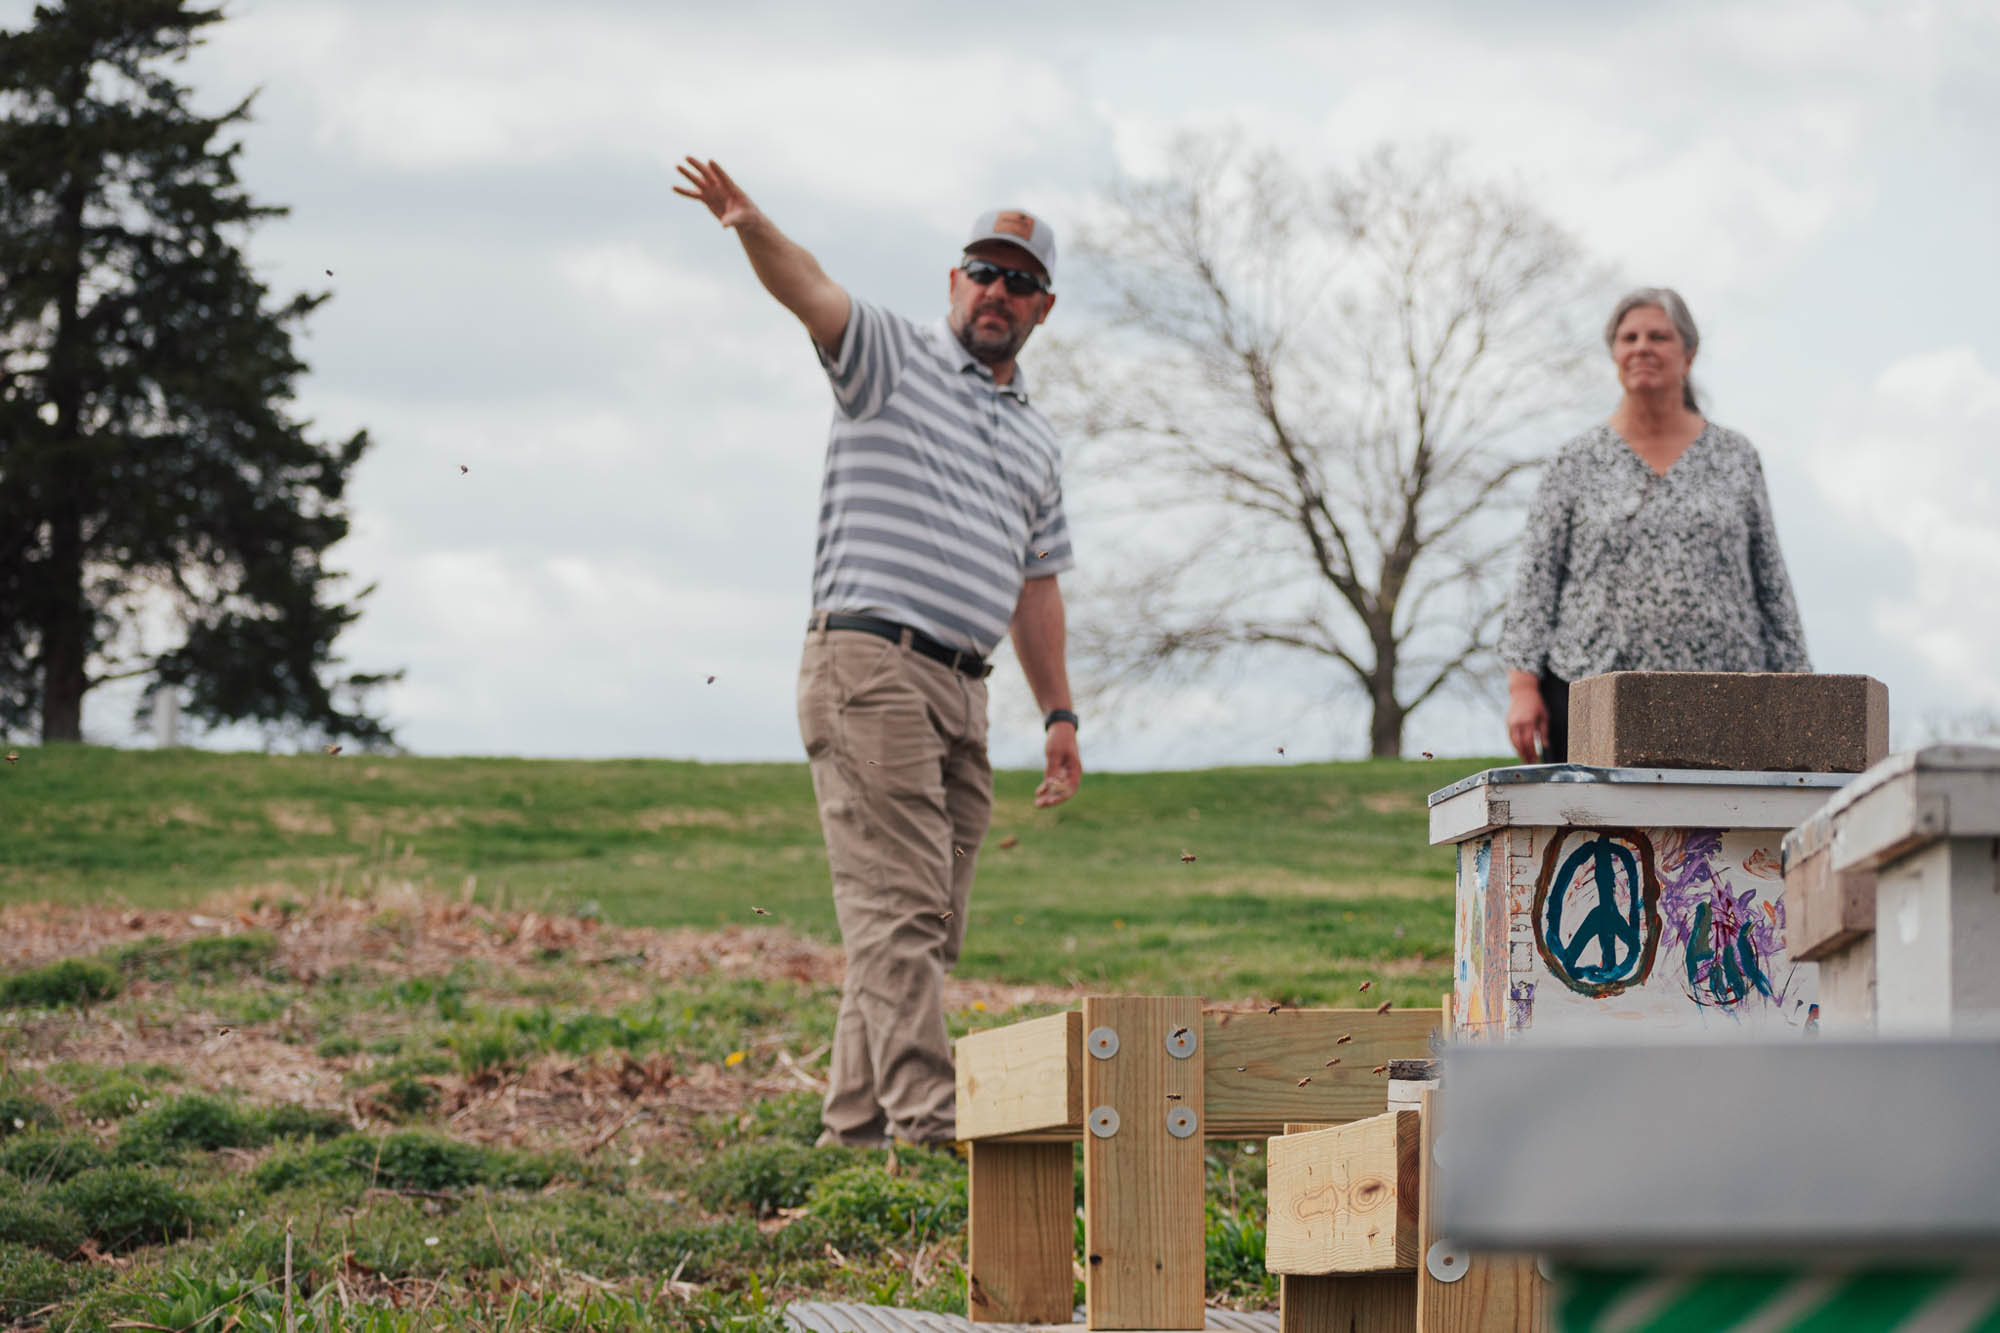 a man gestures to the left. there are beehives in front of him. a woman looks on.